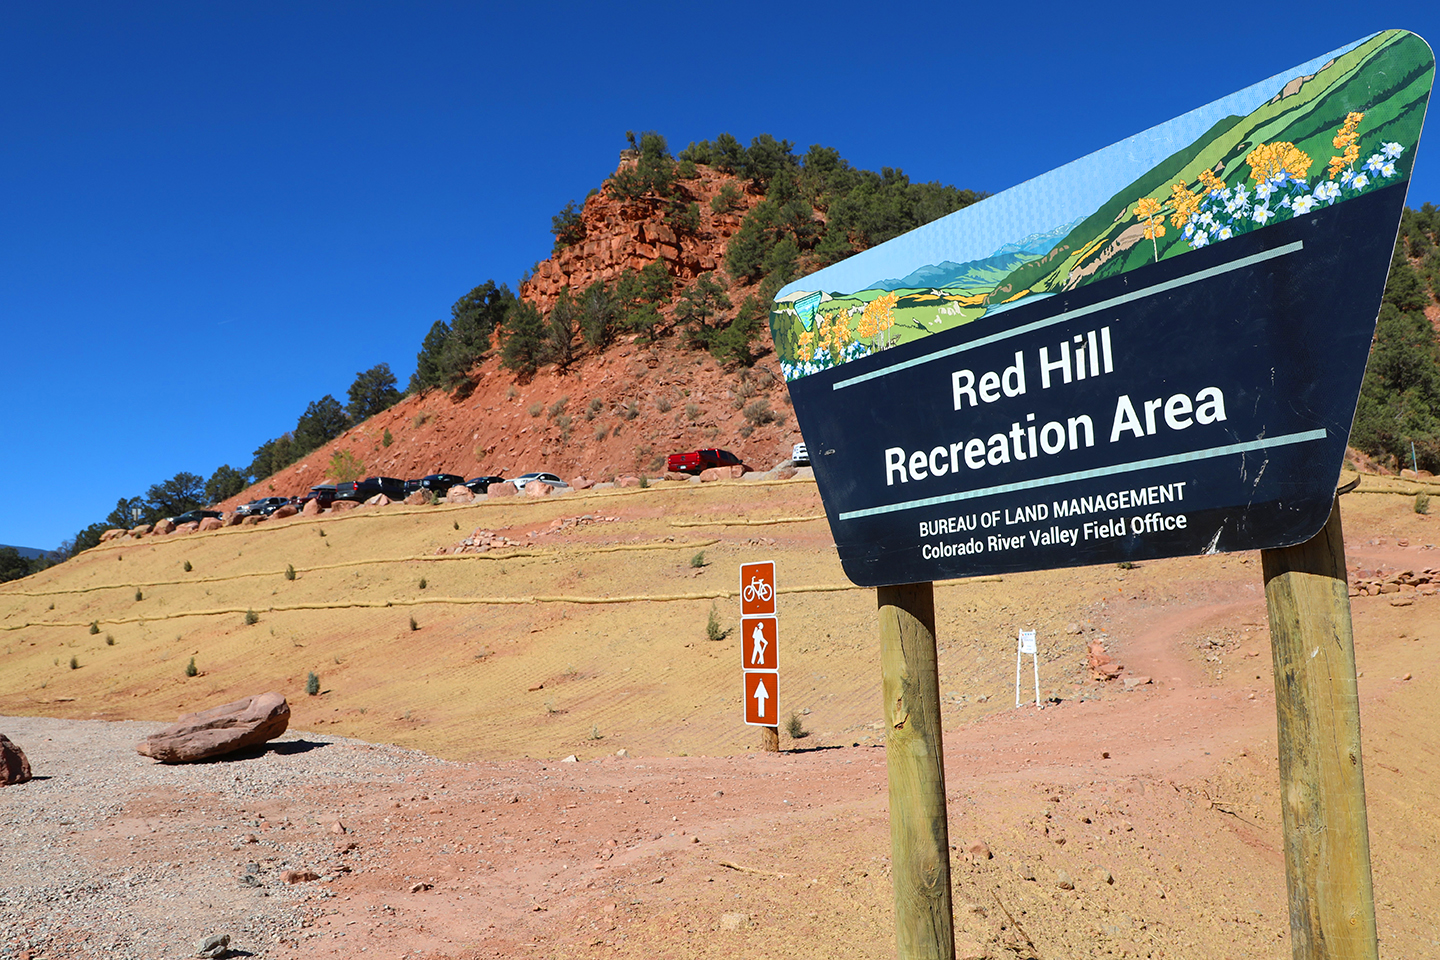 The sign for the Red Hill Recreation Area in Carbondale, Colorado.